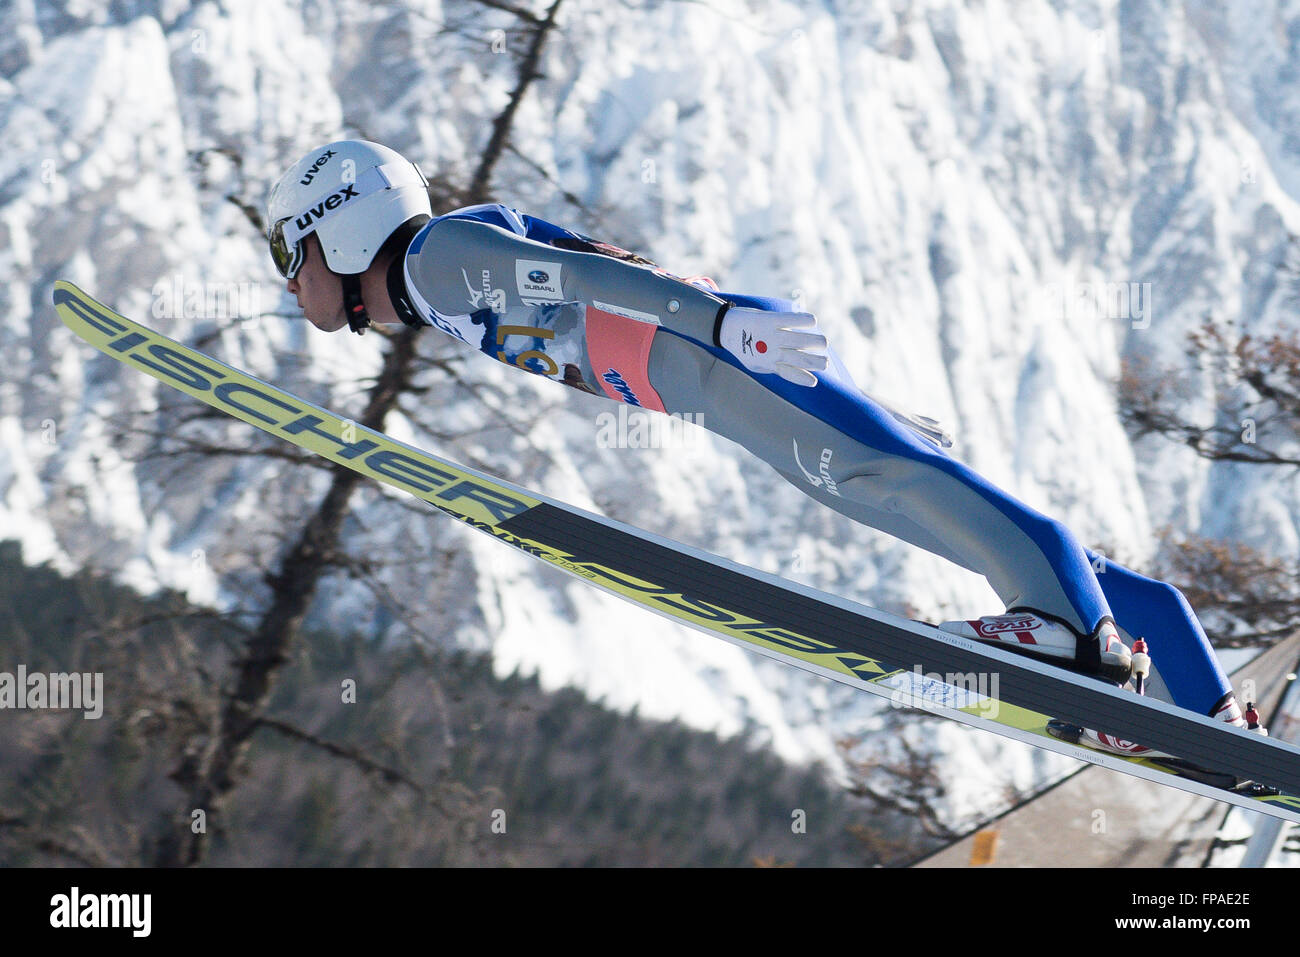 Planica, Slovenia. 18th Mar, 2016. Daiki Ito of Japan competes during Planica FIS Ski Jumping World Cup final on the March 18, 2016 in Planica, Slovenia. © Rok Rakun/Pacific Press/Alamy Live News Stock Photo